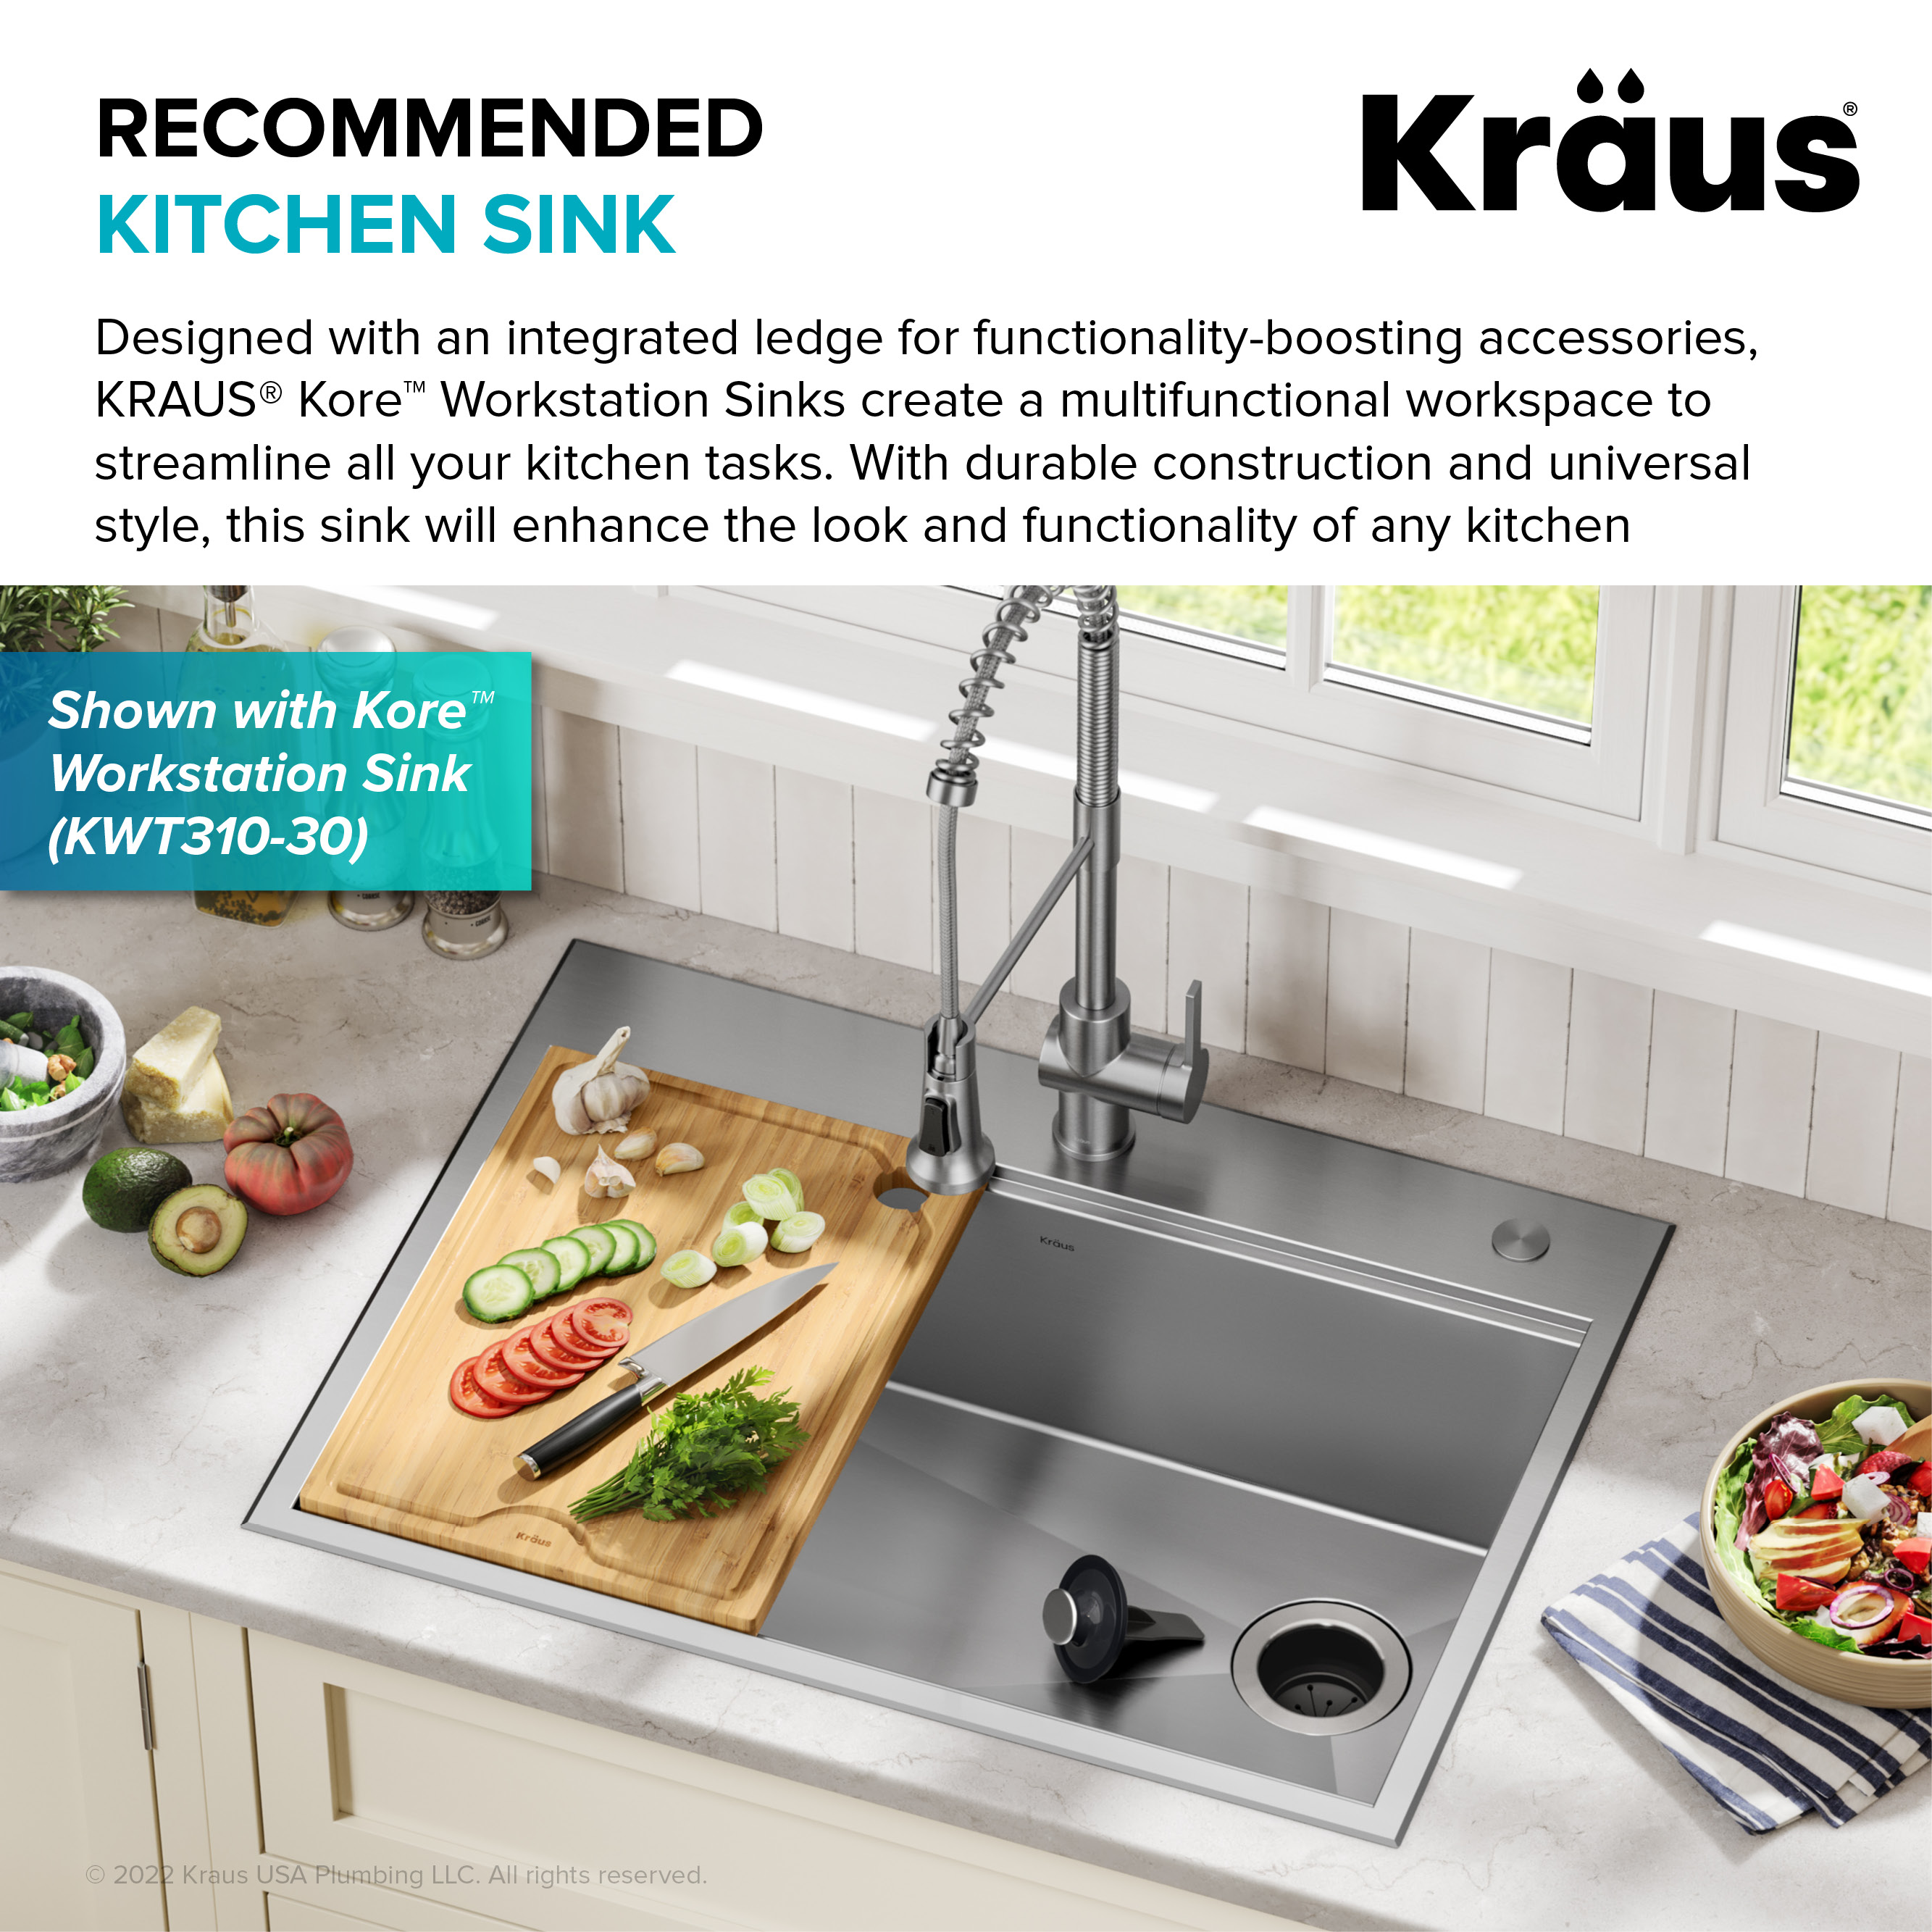 Kraus WasteGuard Corded 1/2-HP Continuous Feed Noise Insulation Garbage  Disposal in the Garbage Disposals department at